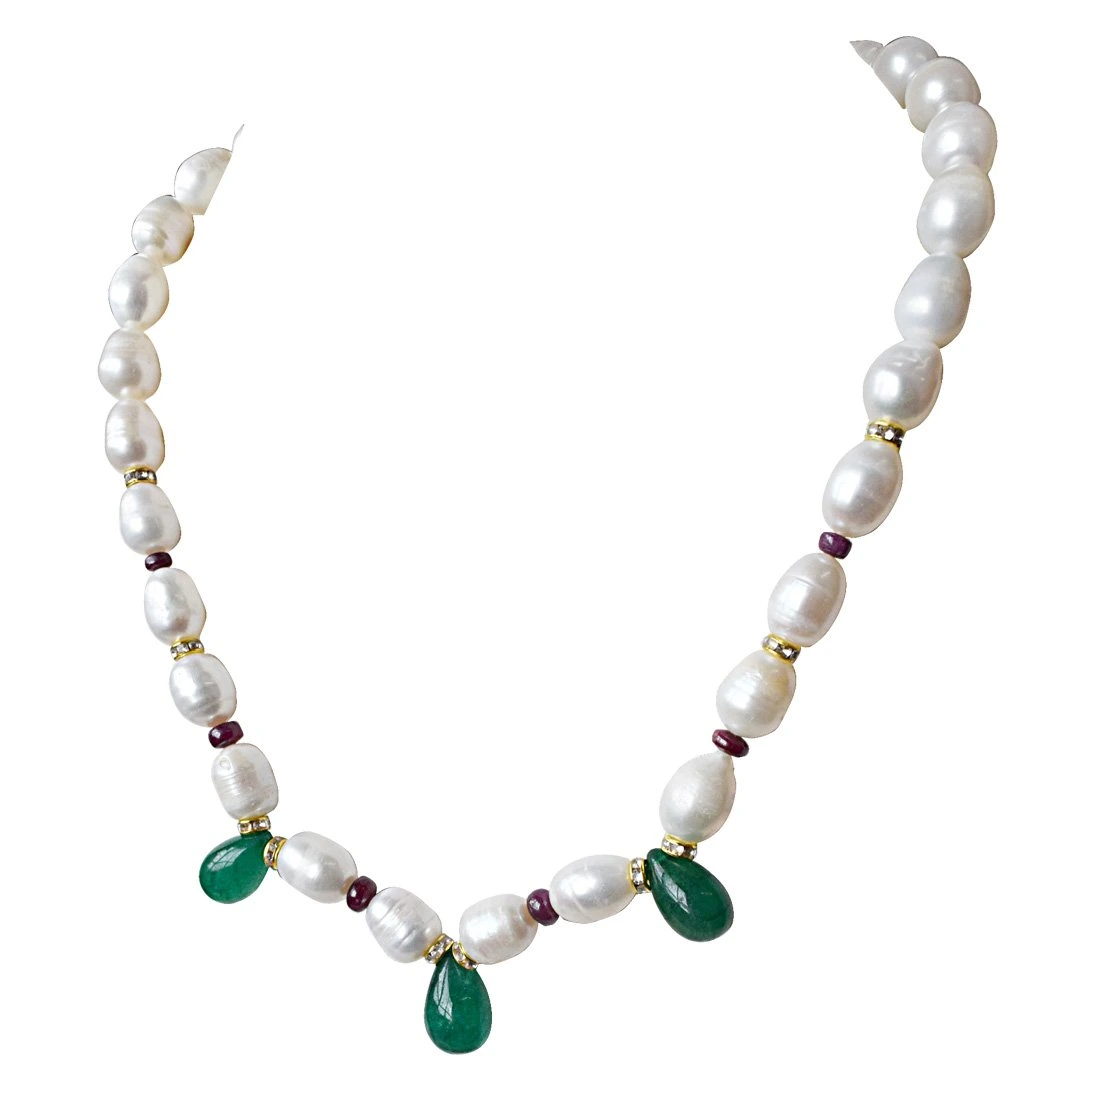 Single Line Drop Green Onyx, Red Ruby Beads, Stone Ring and Big Elongated Pearl Necklace for Women (SN914)